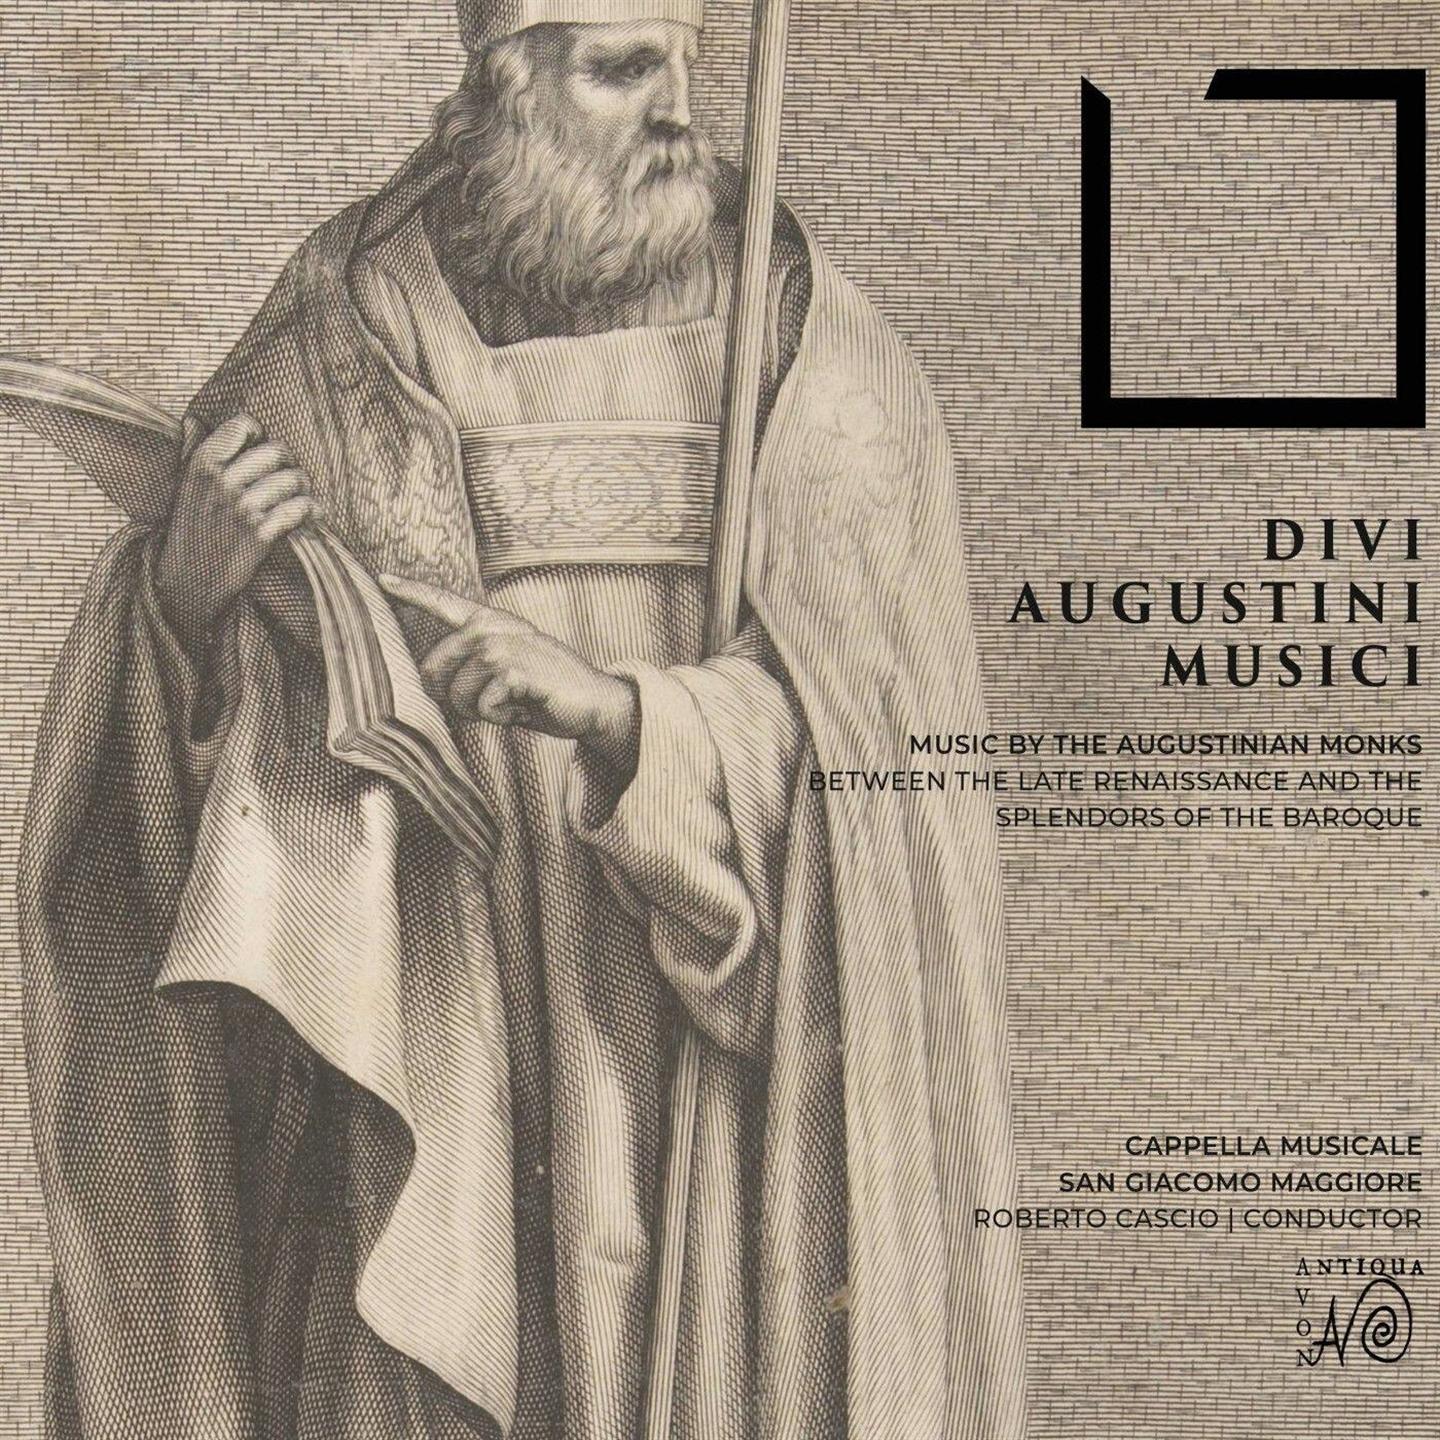 DIVI AUGUSTINI MUSICI - MUSIC BY THE AUGUSTINIAN MONKS